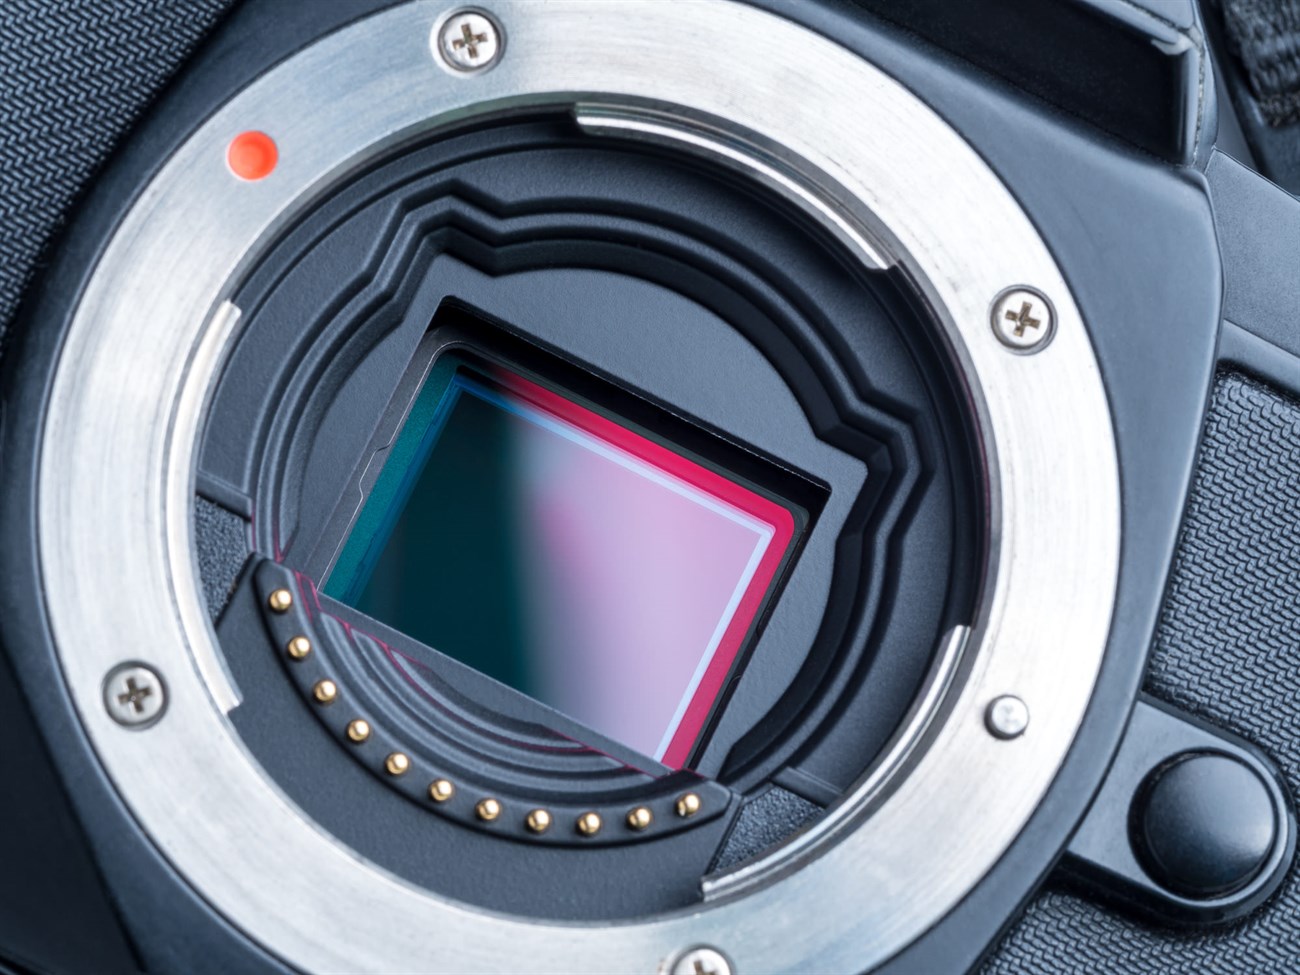 What is a camera sensor? How many types are there? Which type should I buy?